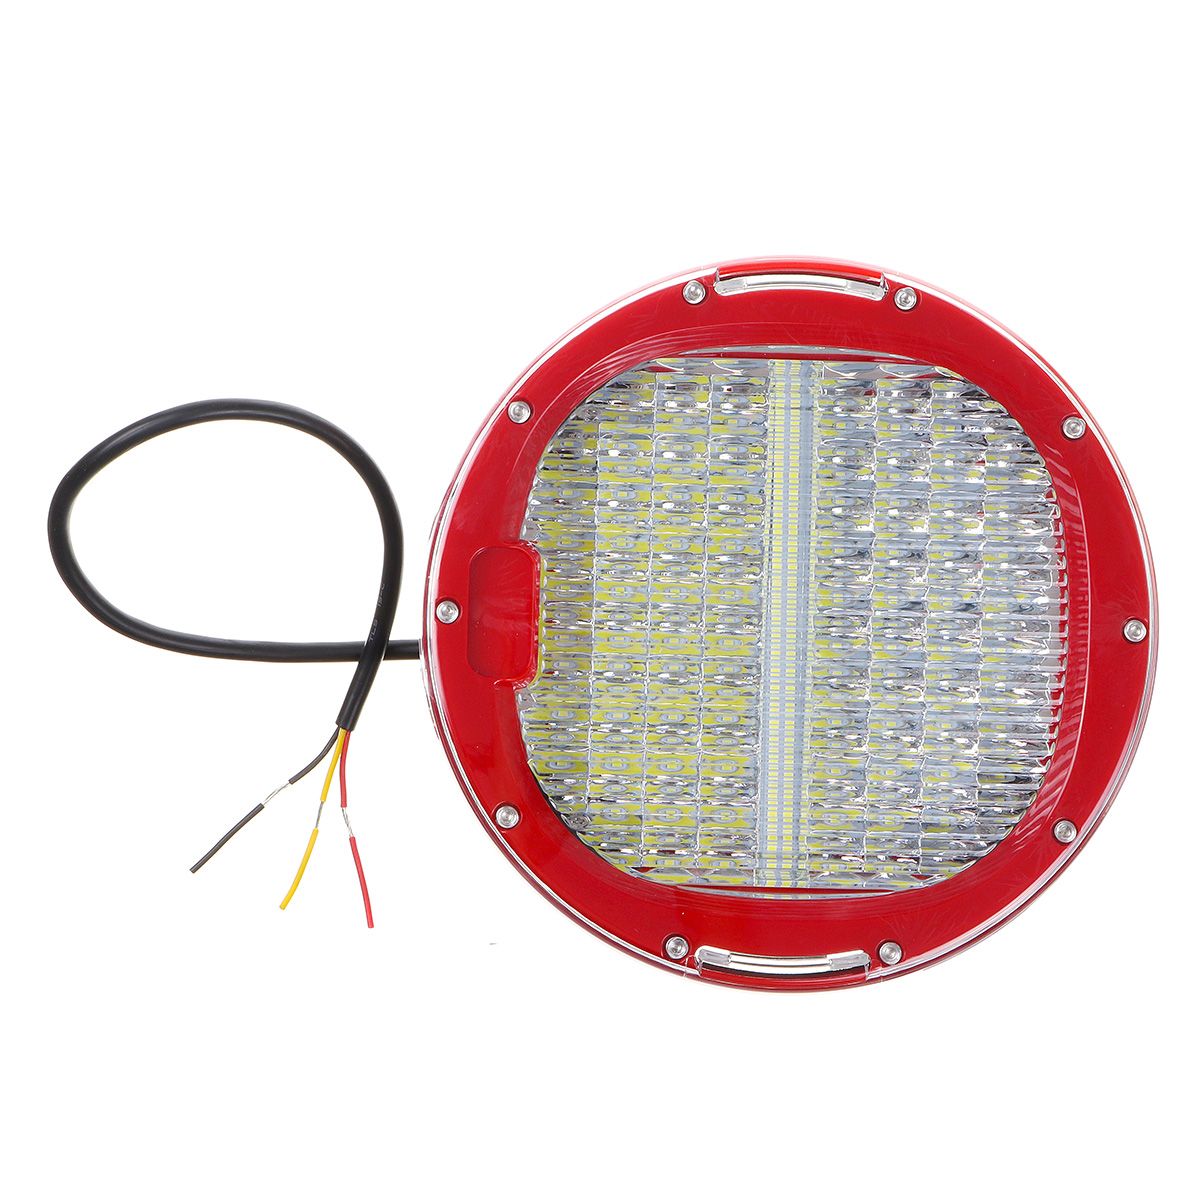 640W-Car-Work-LED-Light-DC9-30V-for-Offroad-vehicle-ATVs-truck-Engineering-Vehicles-1571197